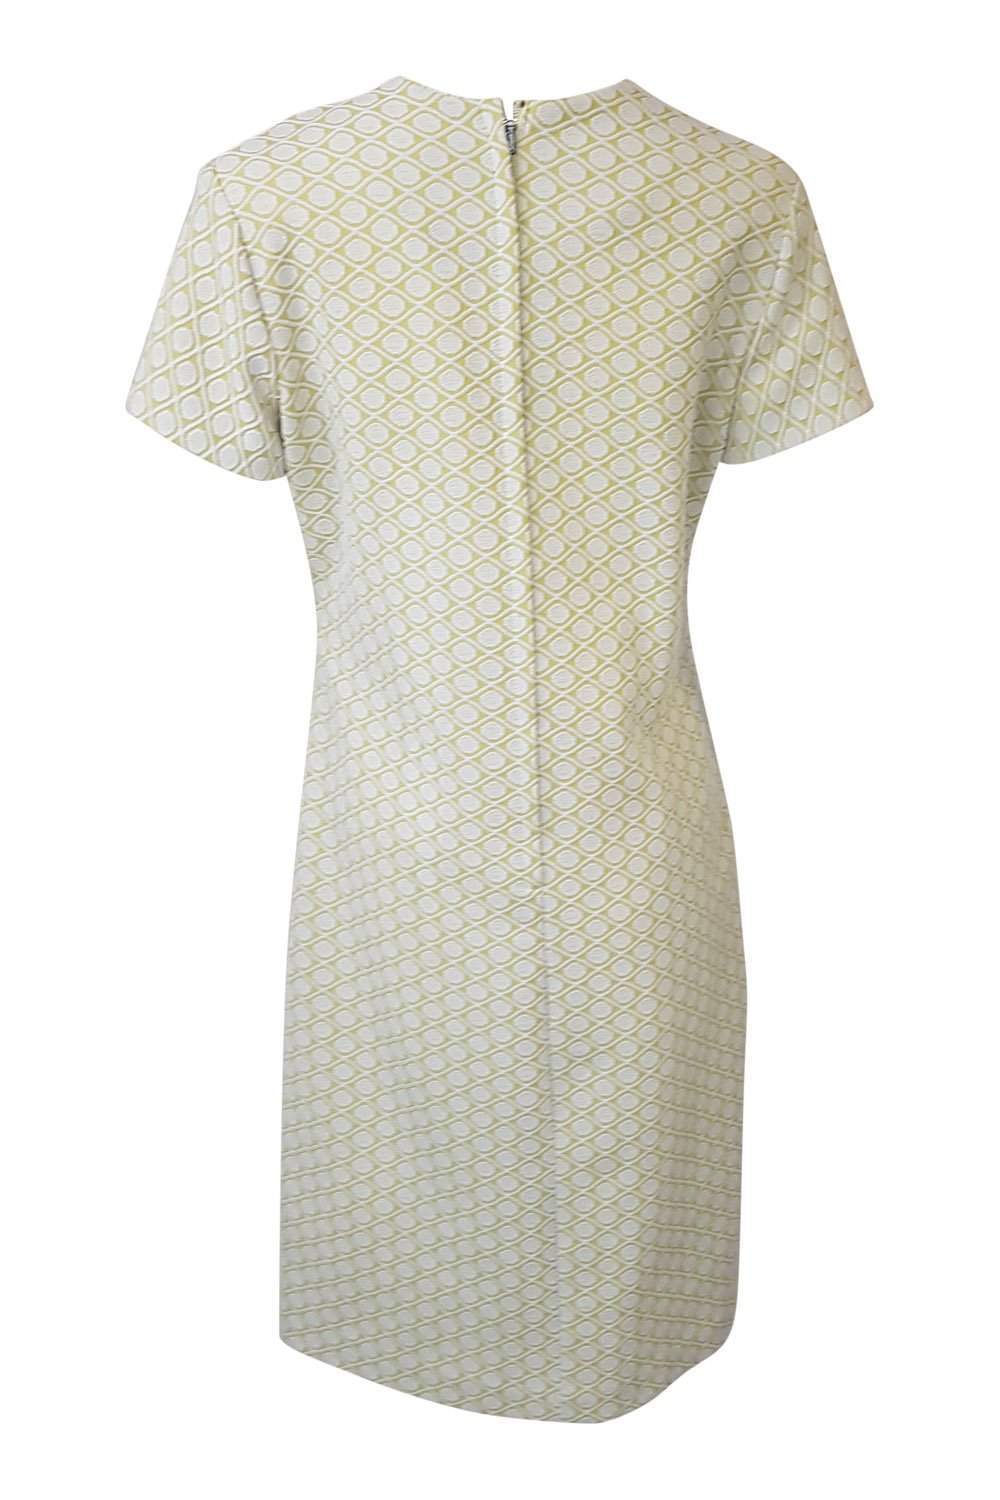 UNBRANDED Lime Green And White Geometric Vintage Dress (UK 14)-Unbranded-The Freperie